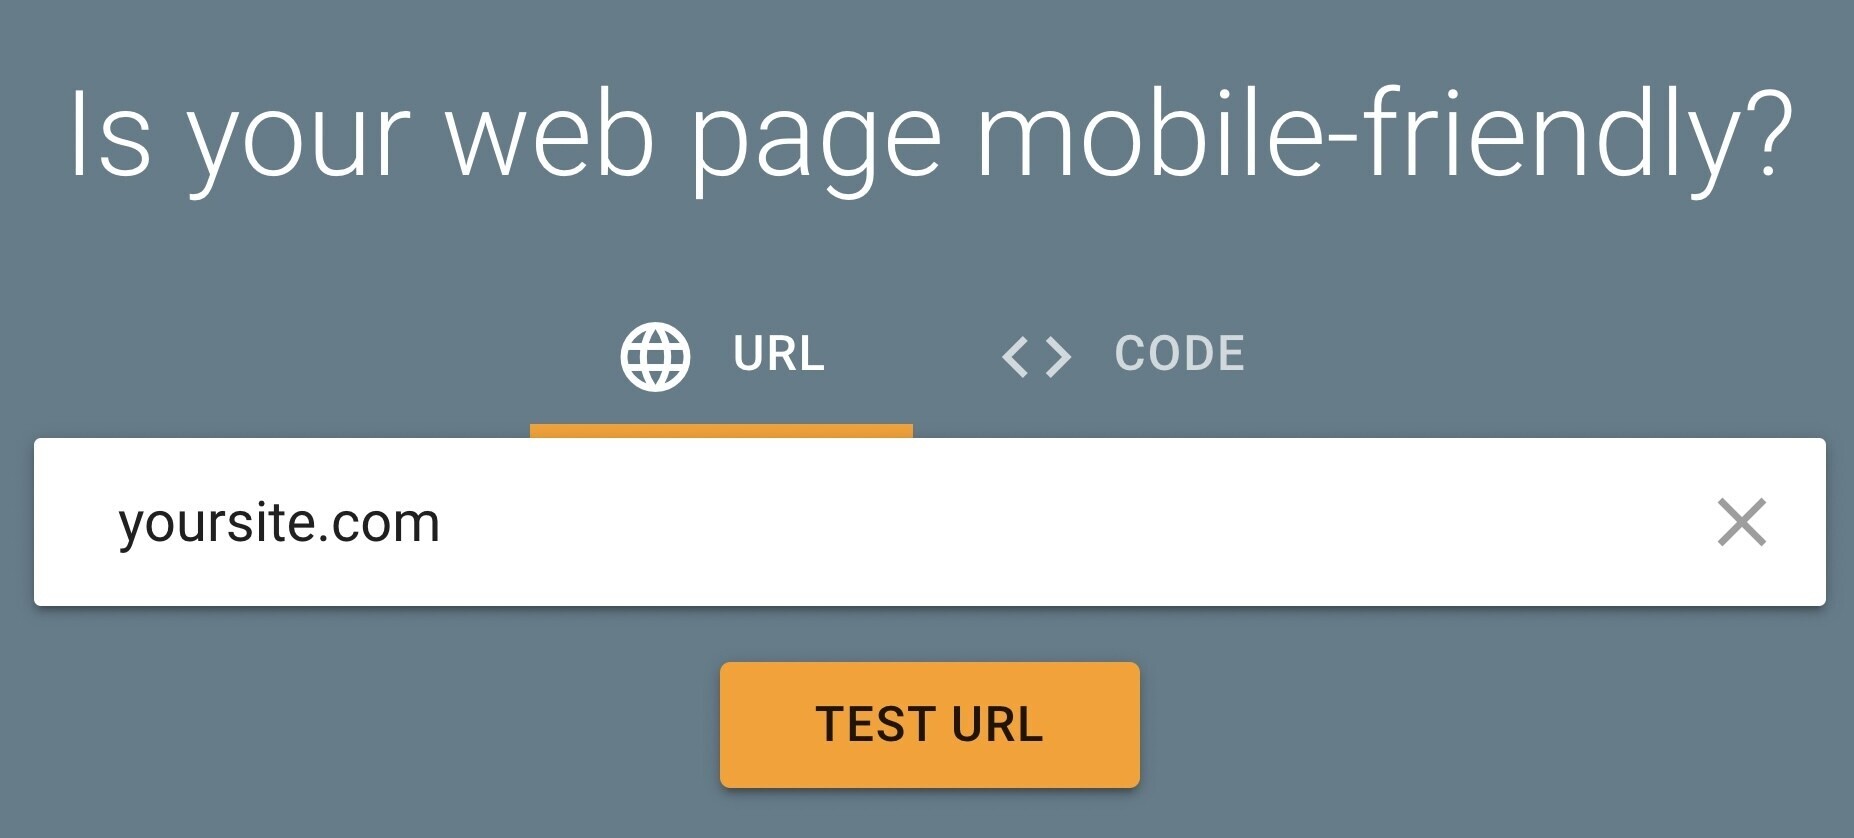 Screenshot of the mobile friendly test tool